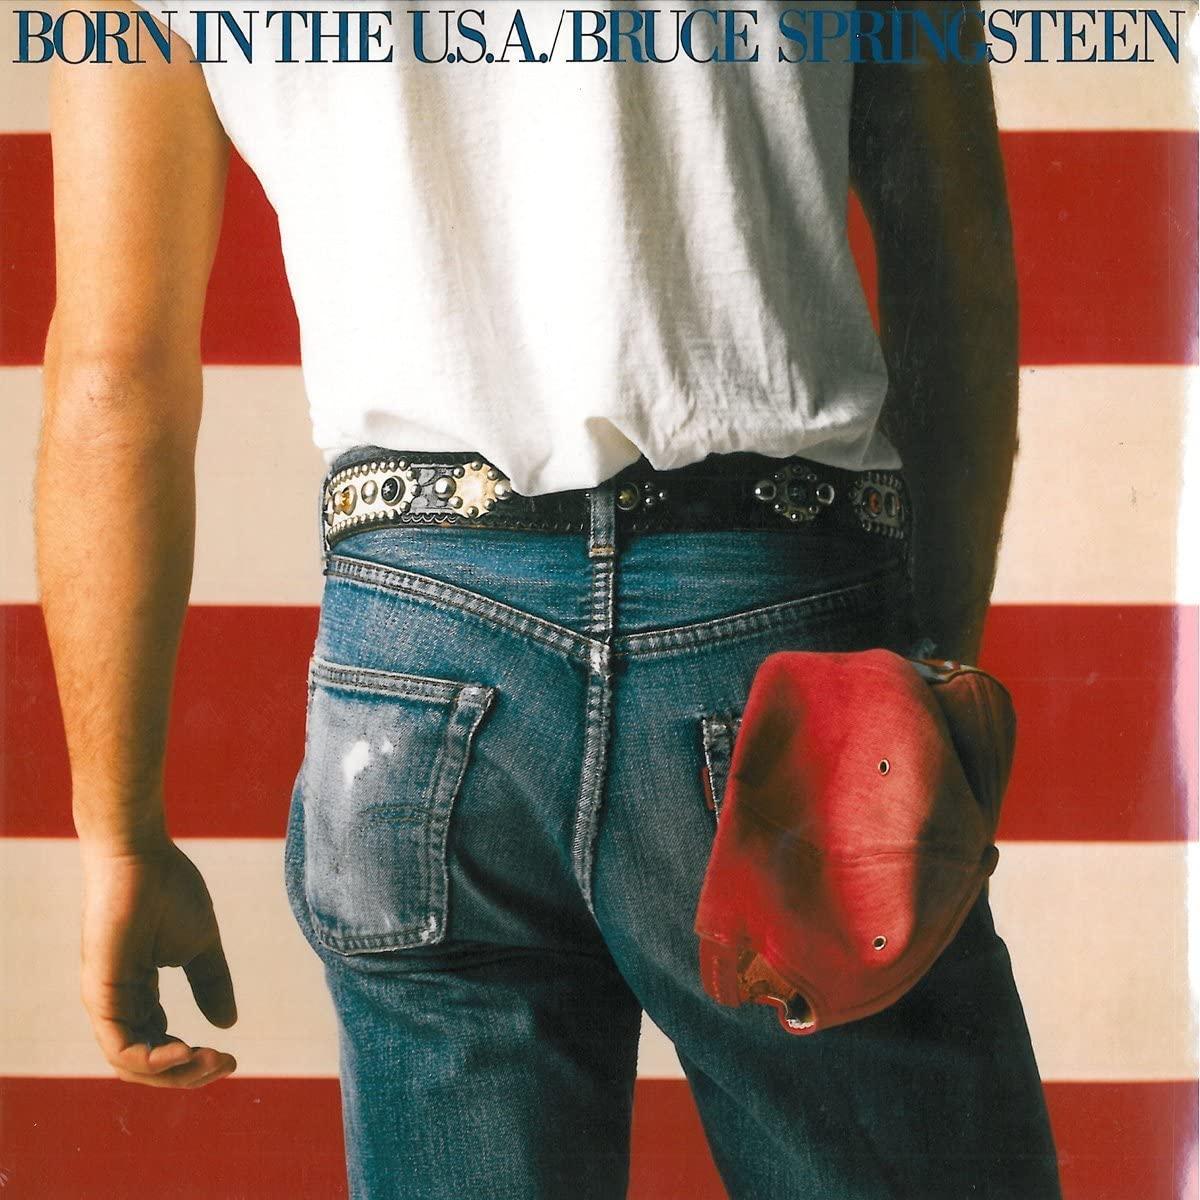 Selected image for BRUCE SPRINGSTEEN - Born in the U.S.A.